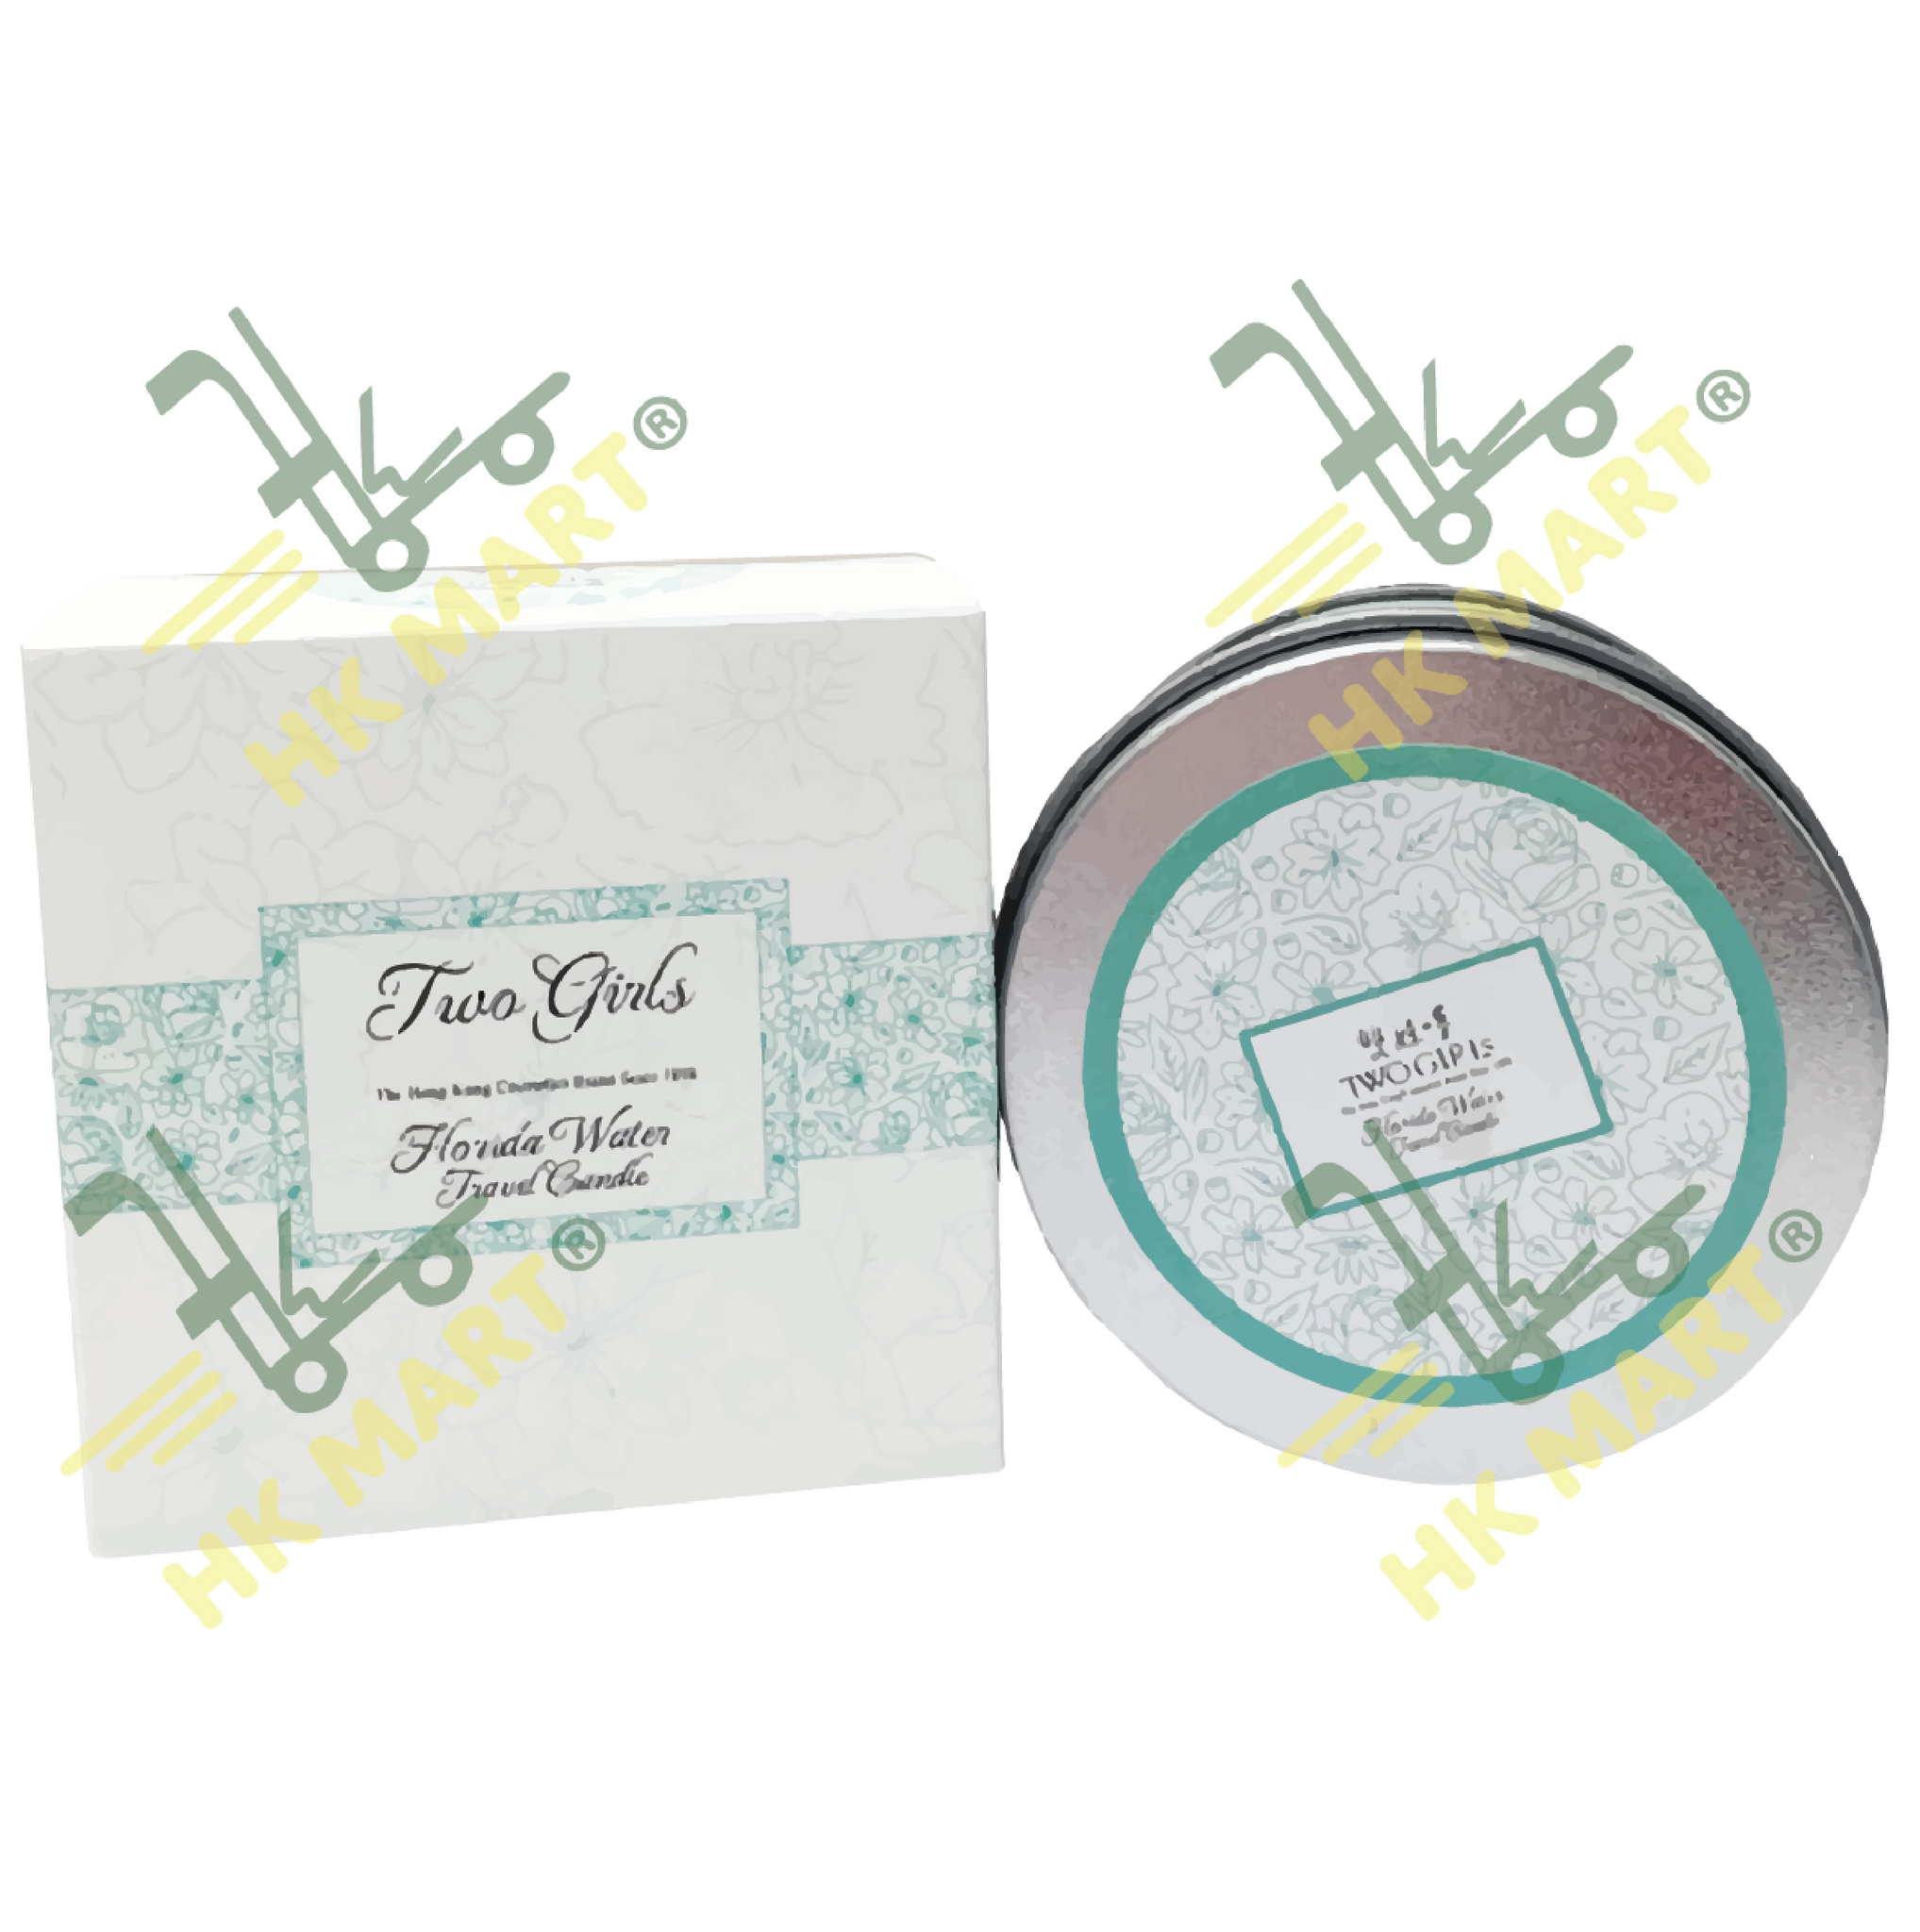 Two Girls Florida Water Travel Candle 110G (Green Color)  雙妹嘜 花露水香味蠟燭旅行裝110克 (綠色)